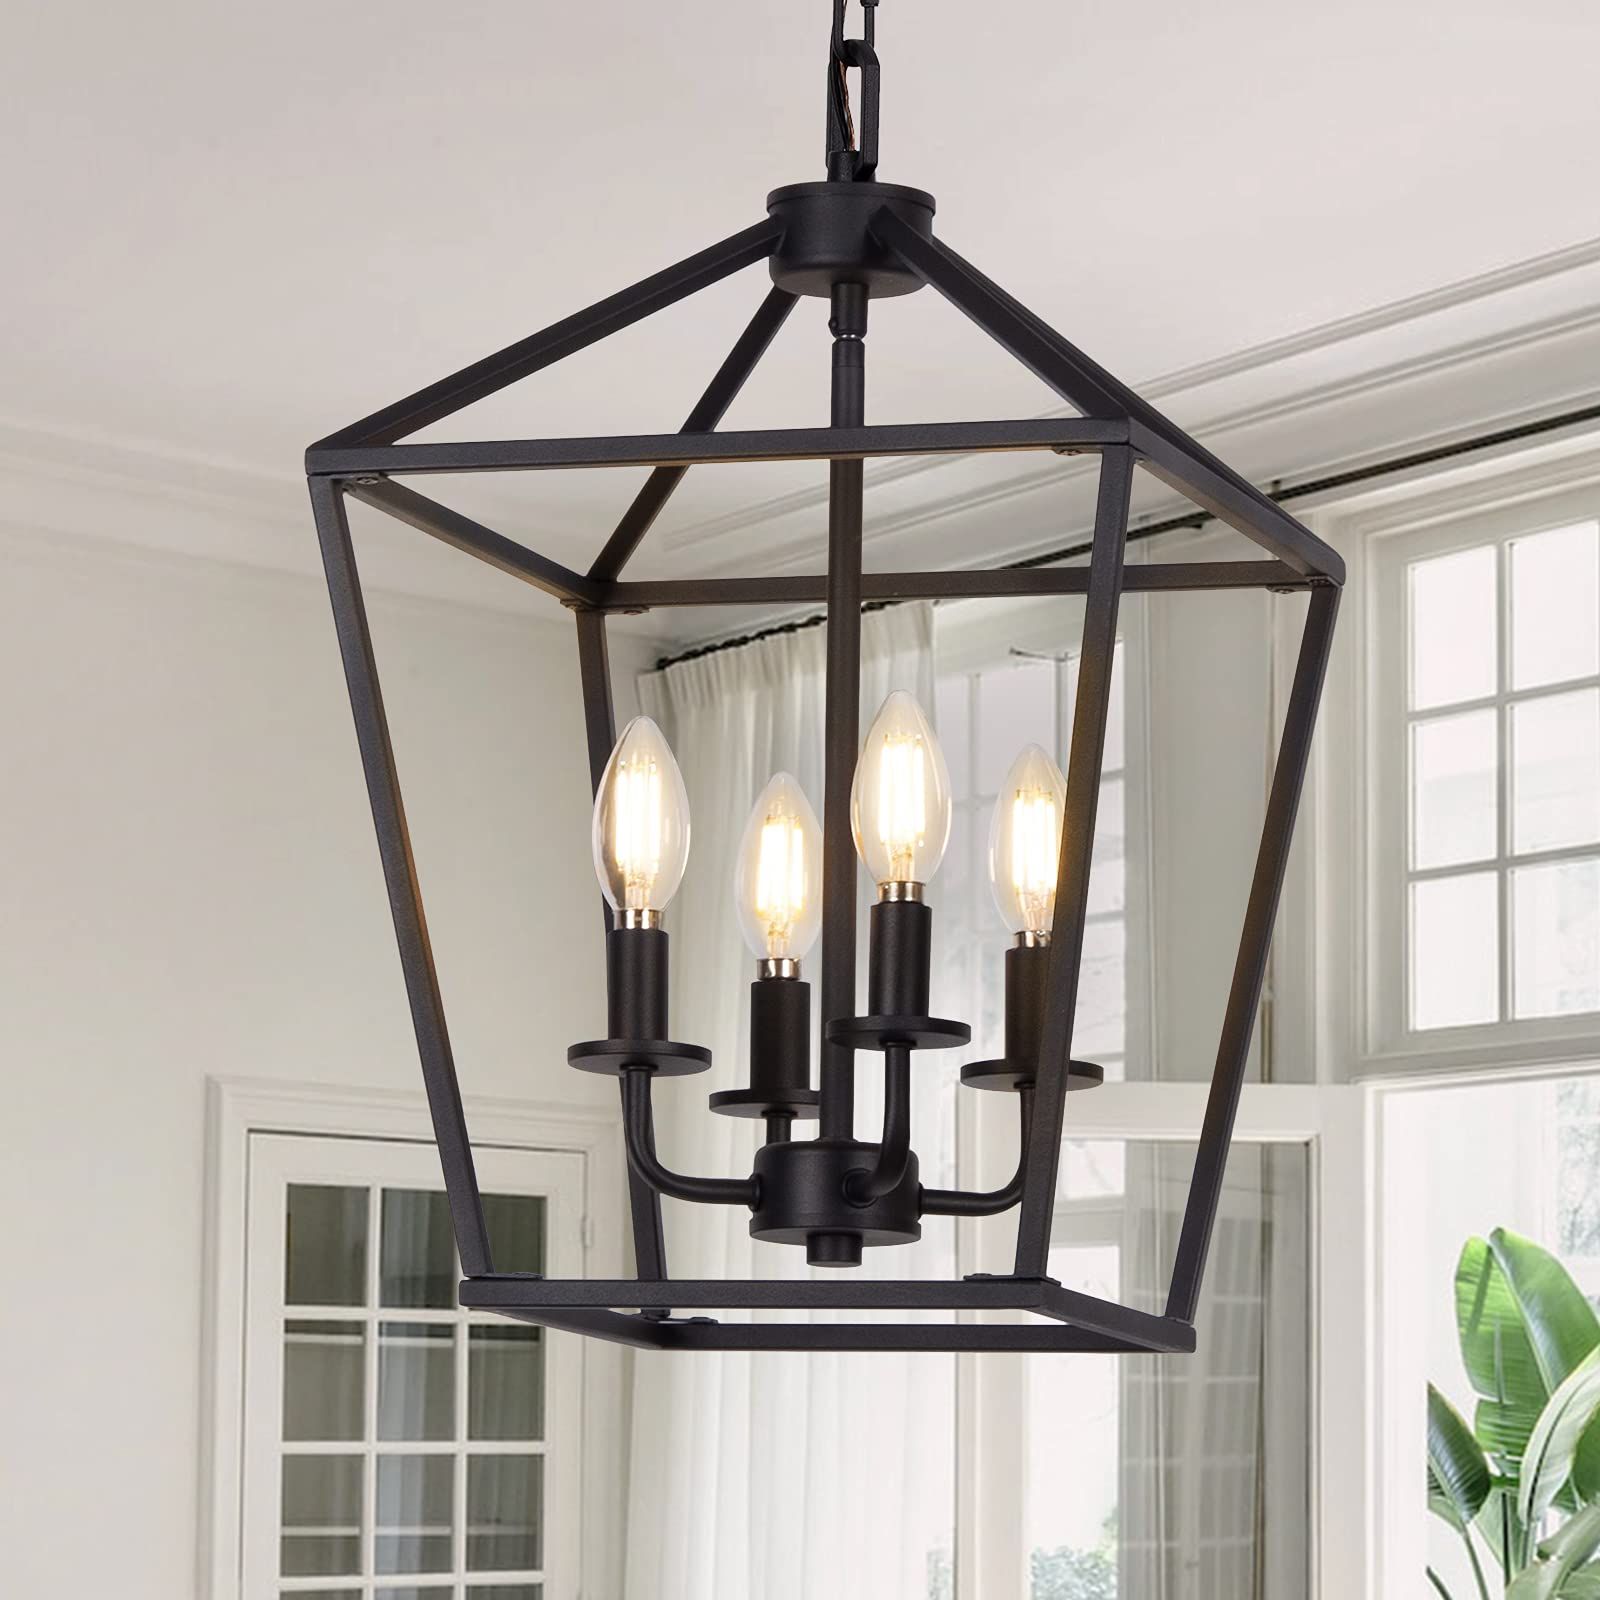 Trendy Rustic Black Lantern Chandeliers Inside 4 Light Pendant Lighting, Industrial Ceiling Light Black Lantern Chandelier  With Farmhouse Metal Cage Adjustable Height Rustic Geometric Hanging Light  E12 Base For Kitchen Island, Bedroom Or Entryway – – Amazon (View 1 of 15)